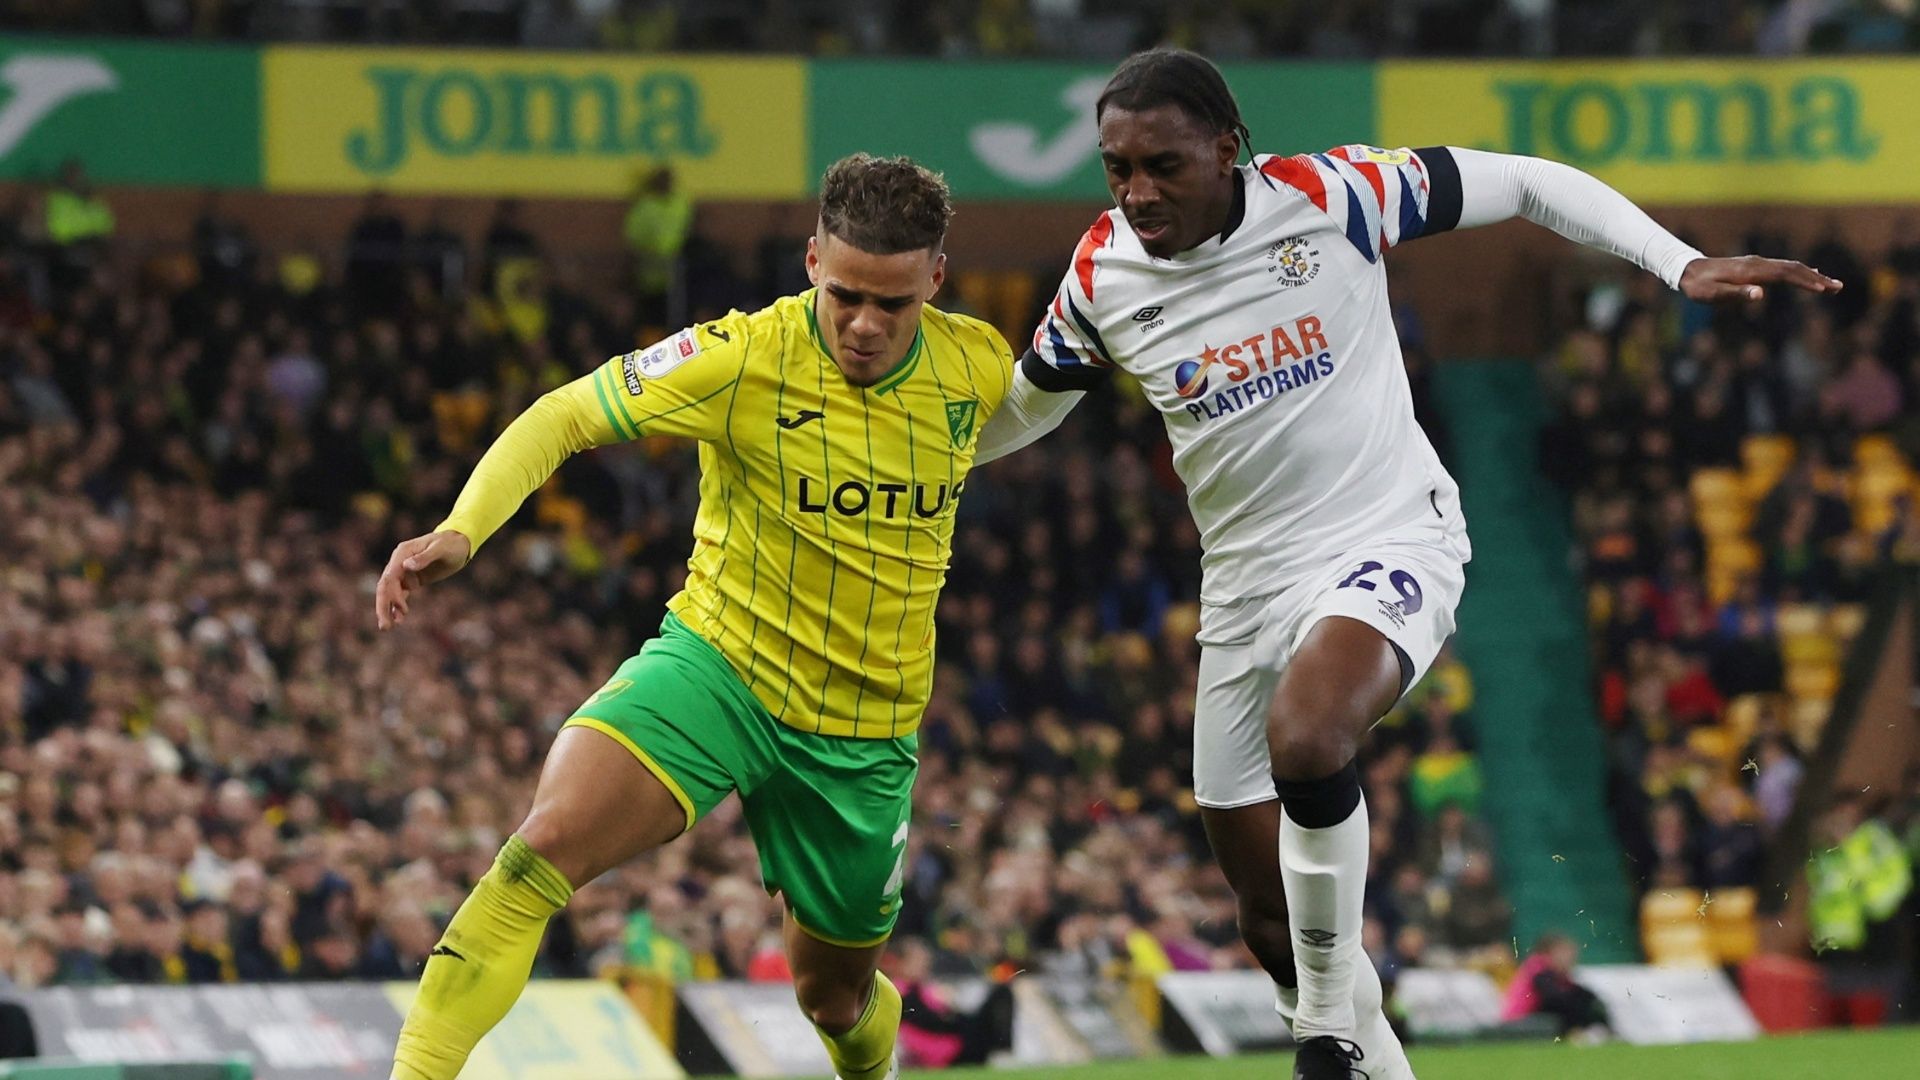 Luton Town gave Norwich City Max Aarons who became a modern-day hero